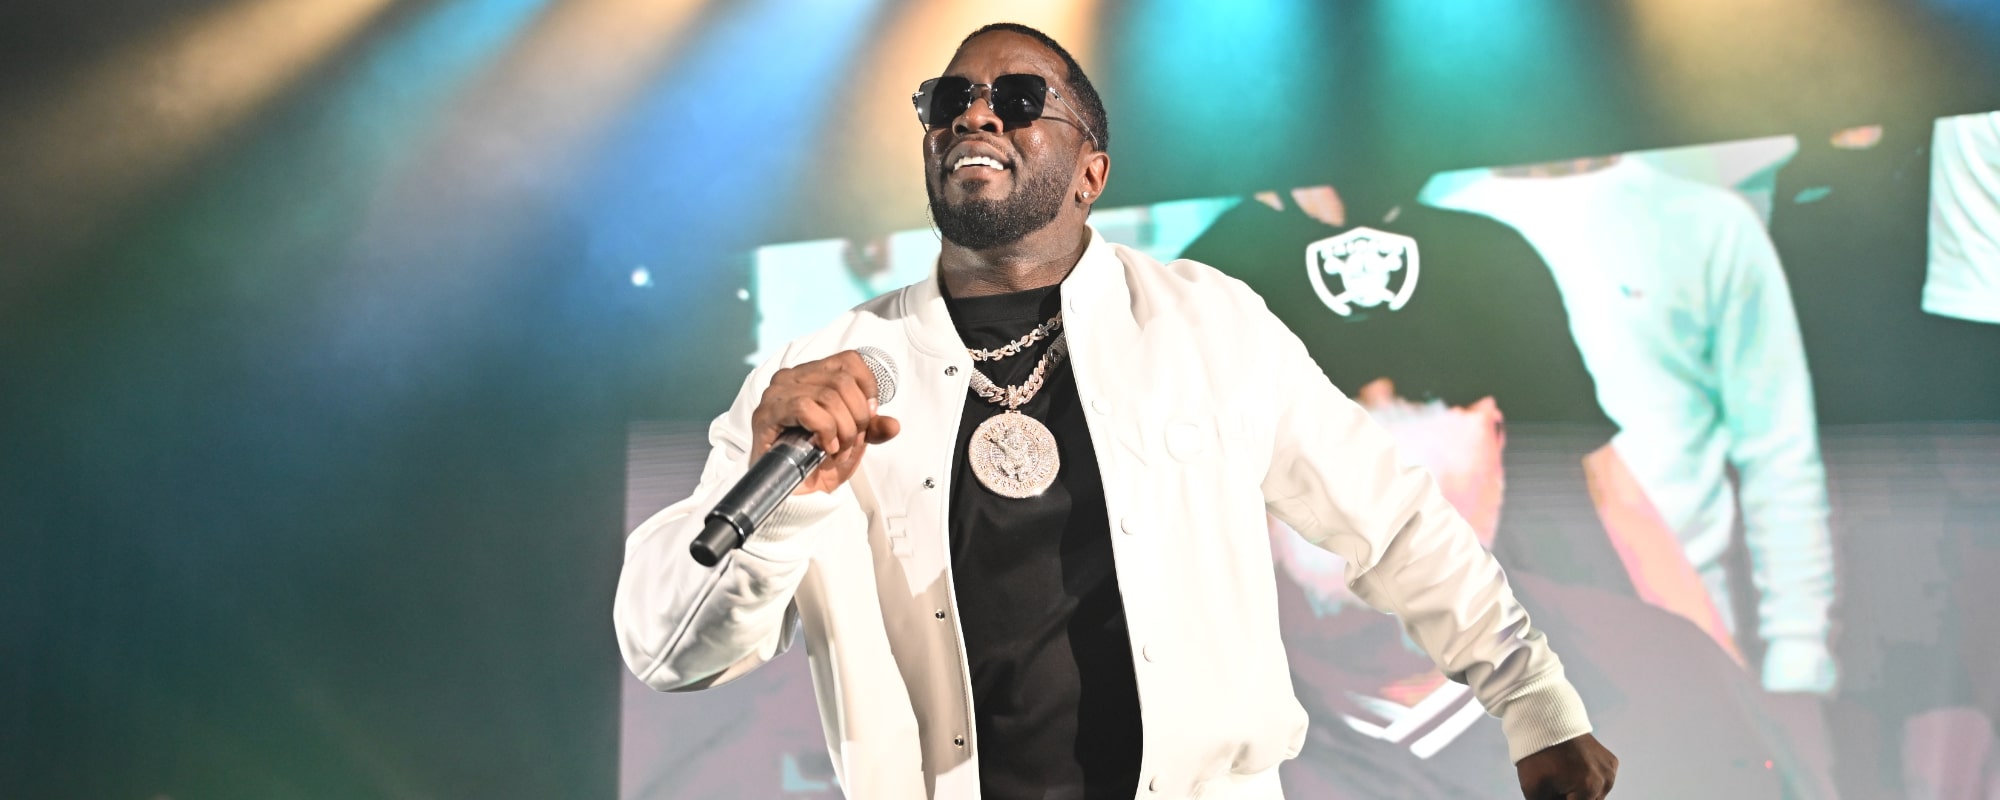 Sean “Diddy” Combs Spotted Living Carefree in Miami After Federal Raids on His Properties